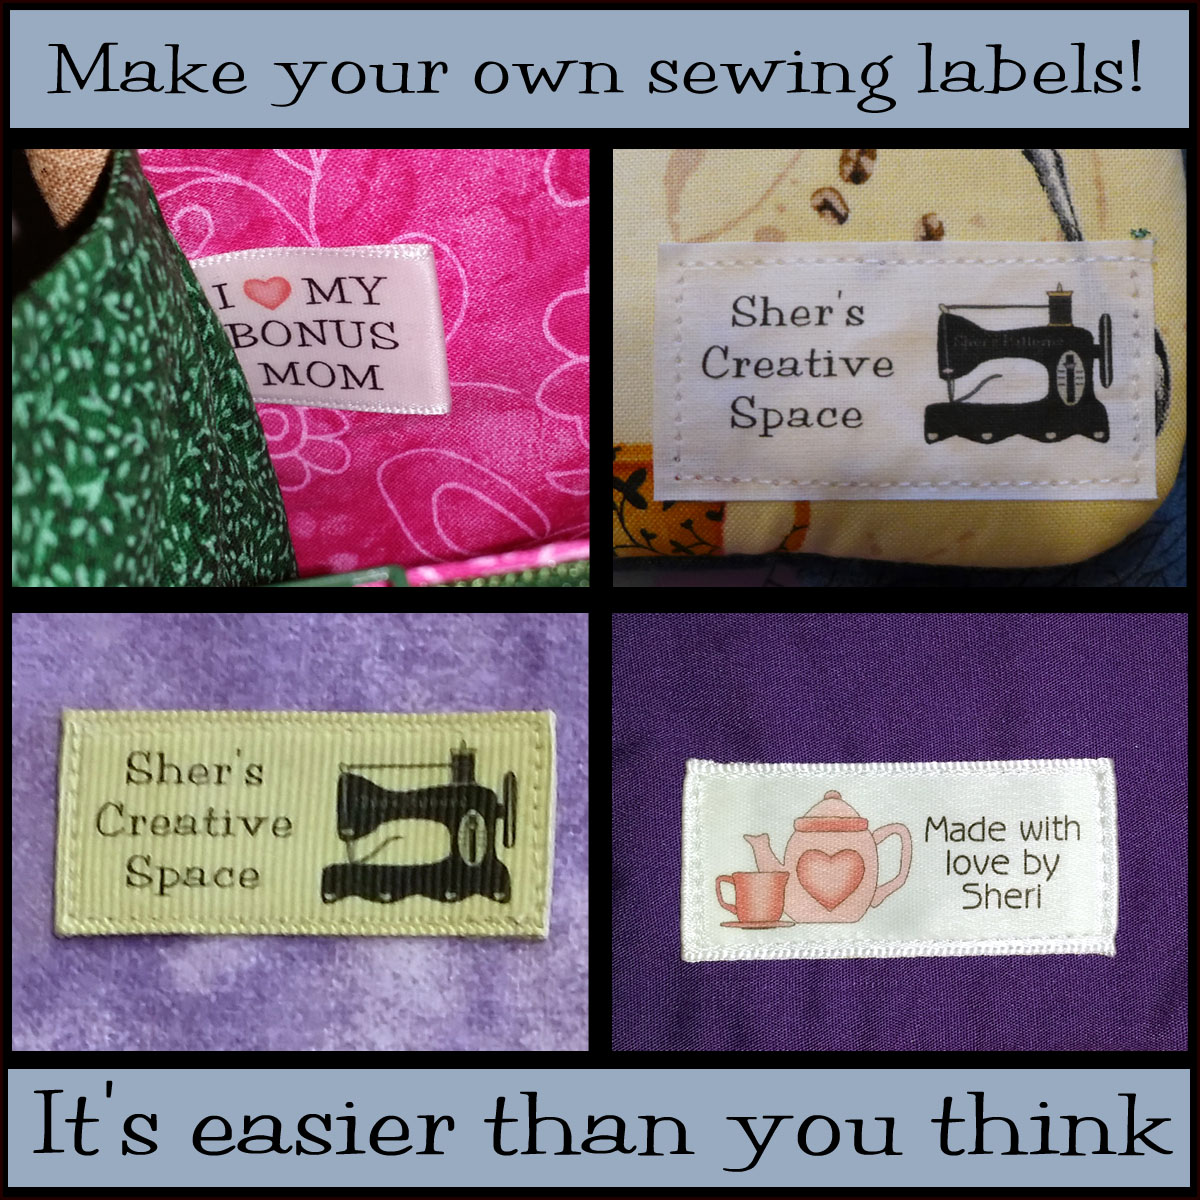 Sher's Creative Space: YES! You CAN Make Your Own Sewing Labels!